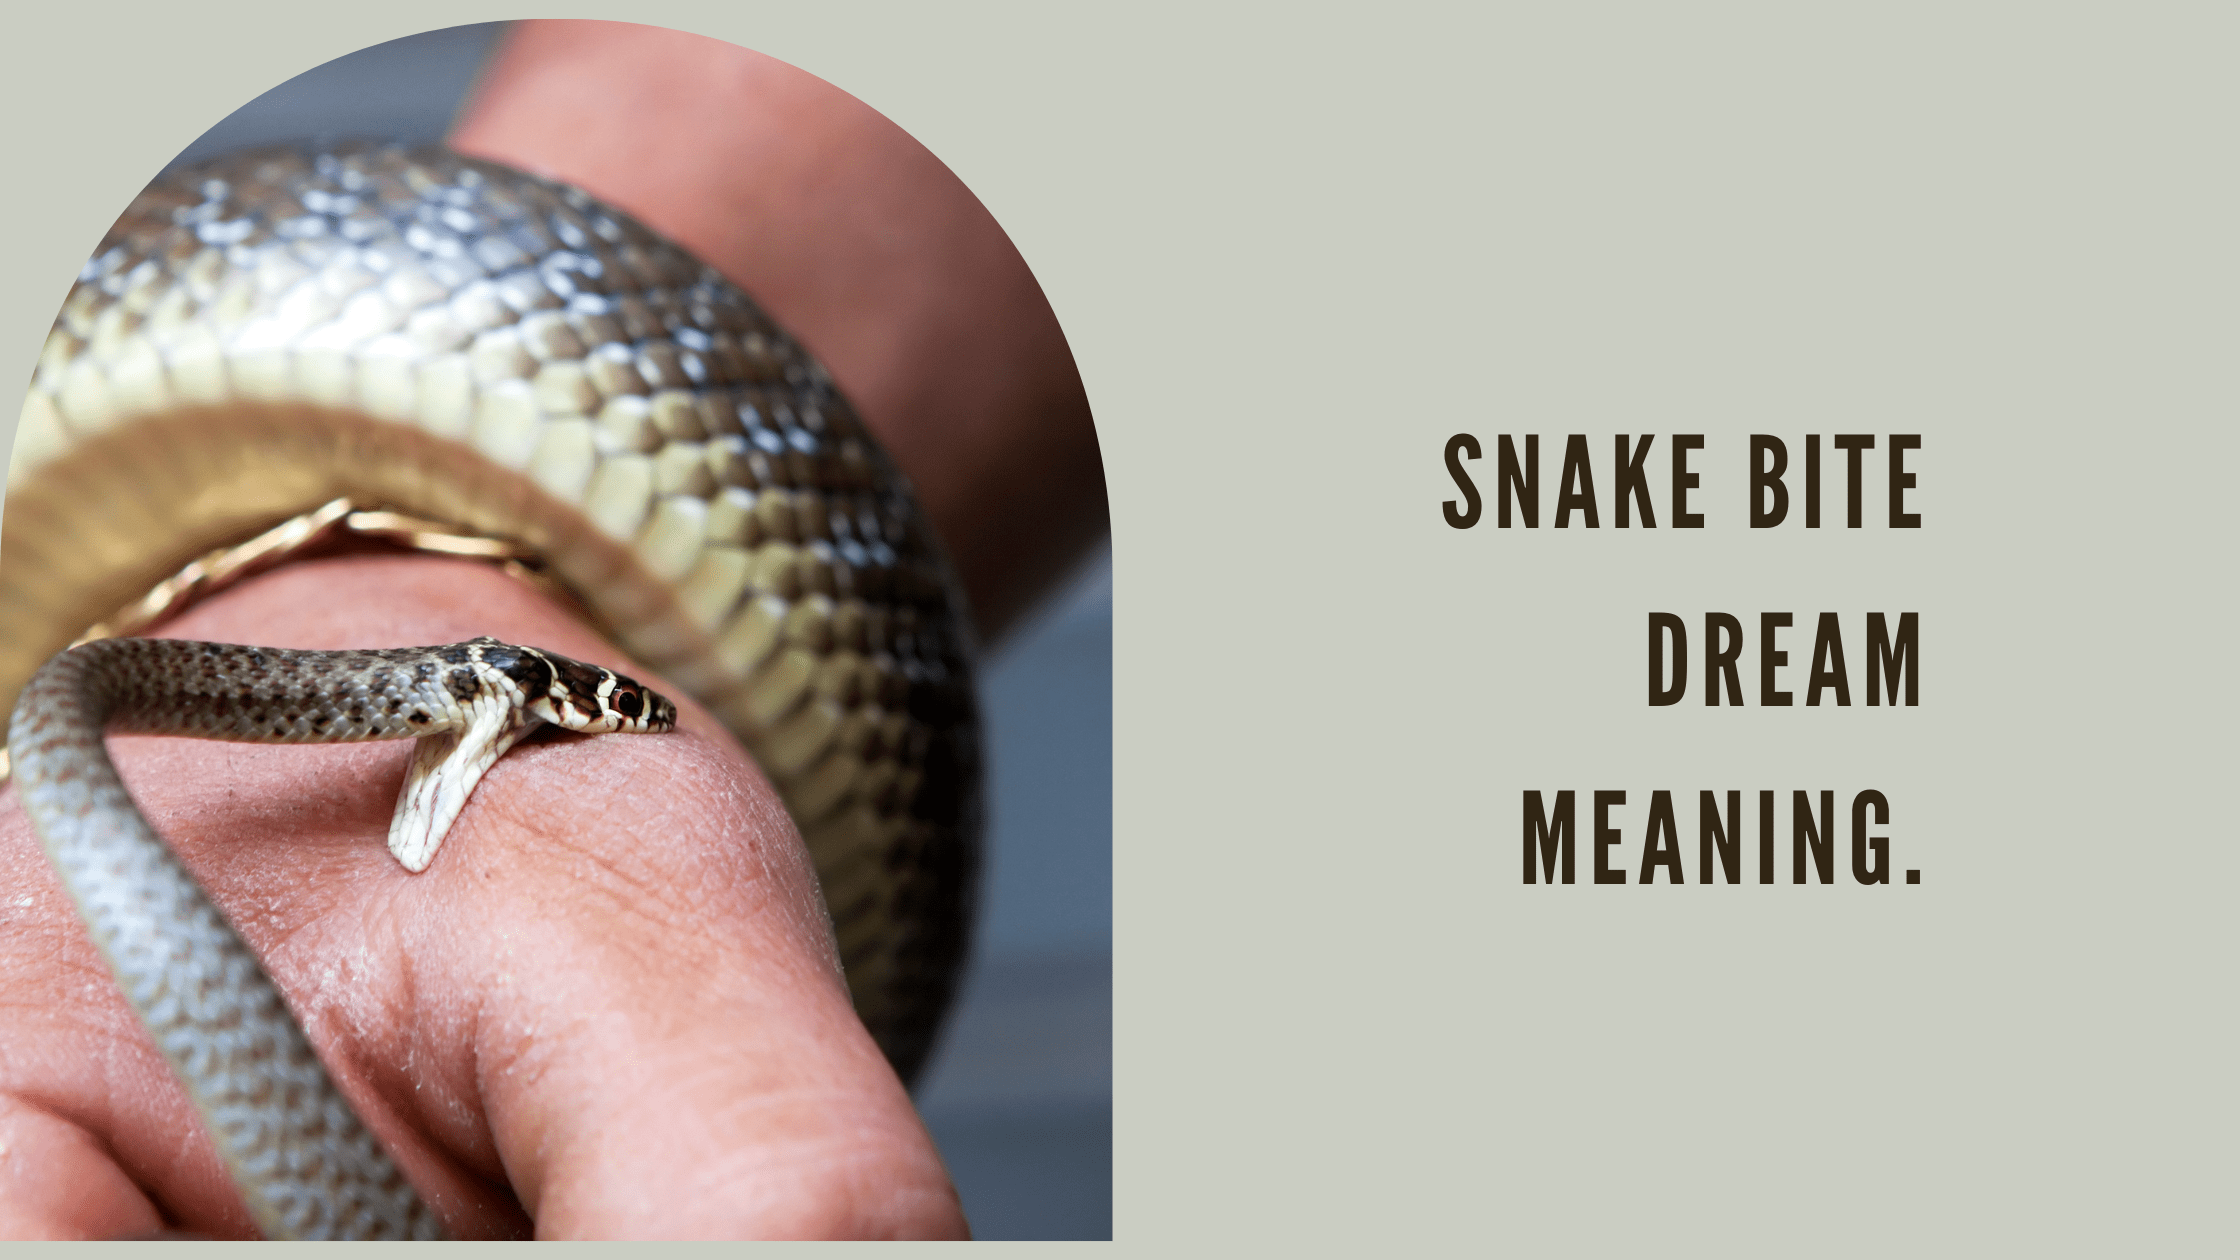 The image is of a snake coiled around a person's arm with the snake's head near the person's fingers. The text reads 'Snake Bite Dream Meaning'.